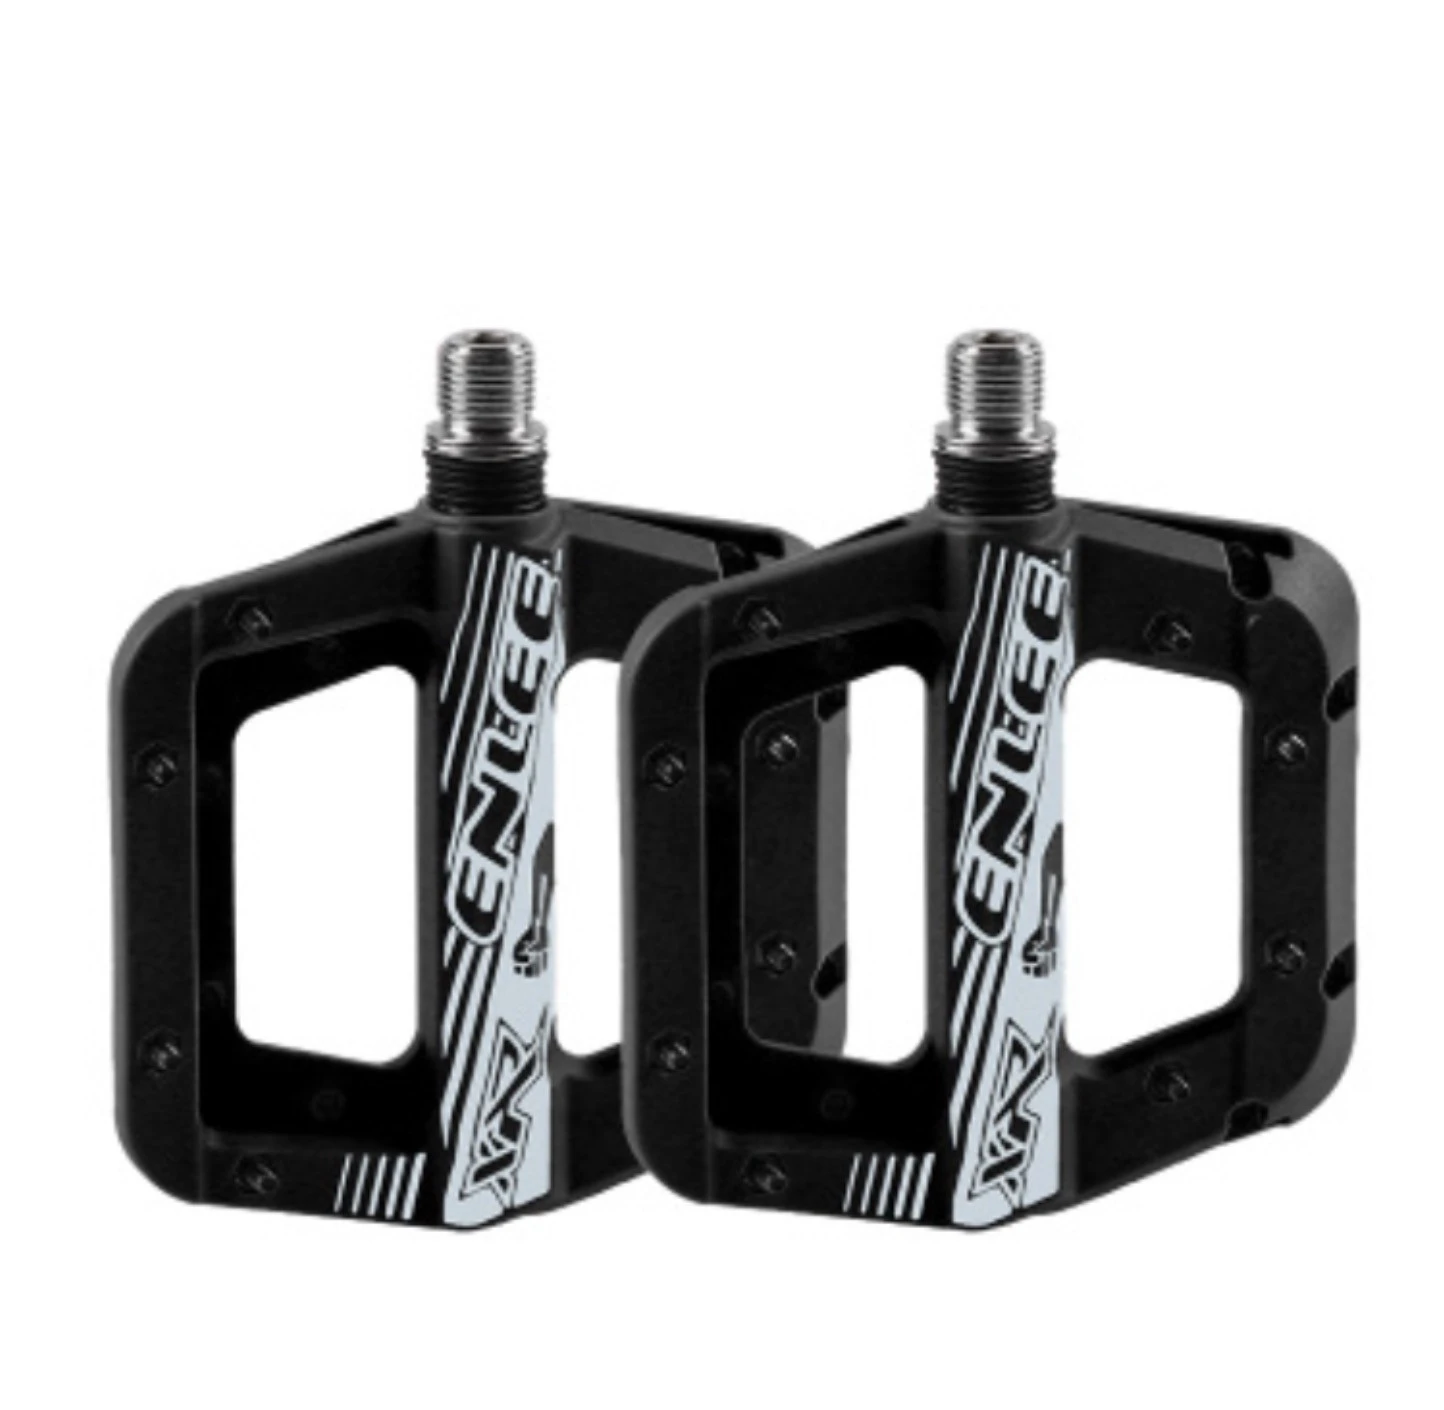 2020 new trend pedal 9/16 Inch flat pedals bearing mtb pedal bike parts